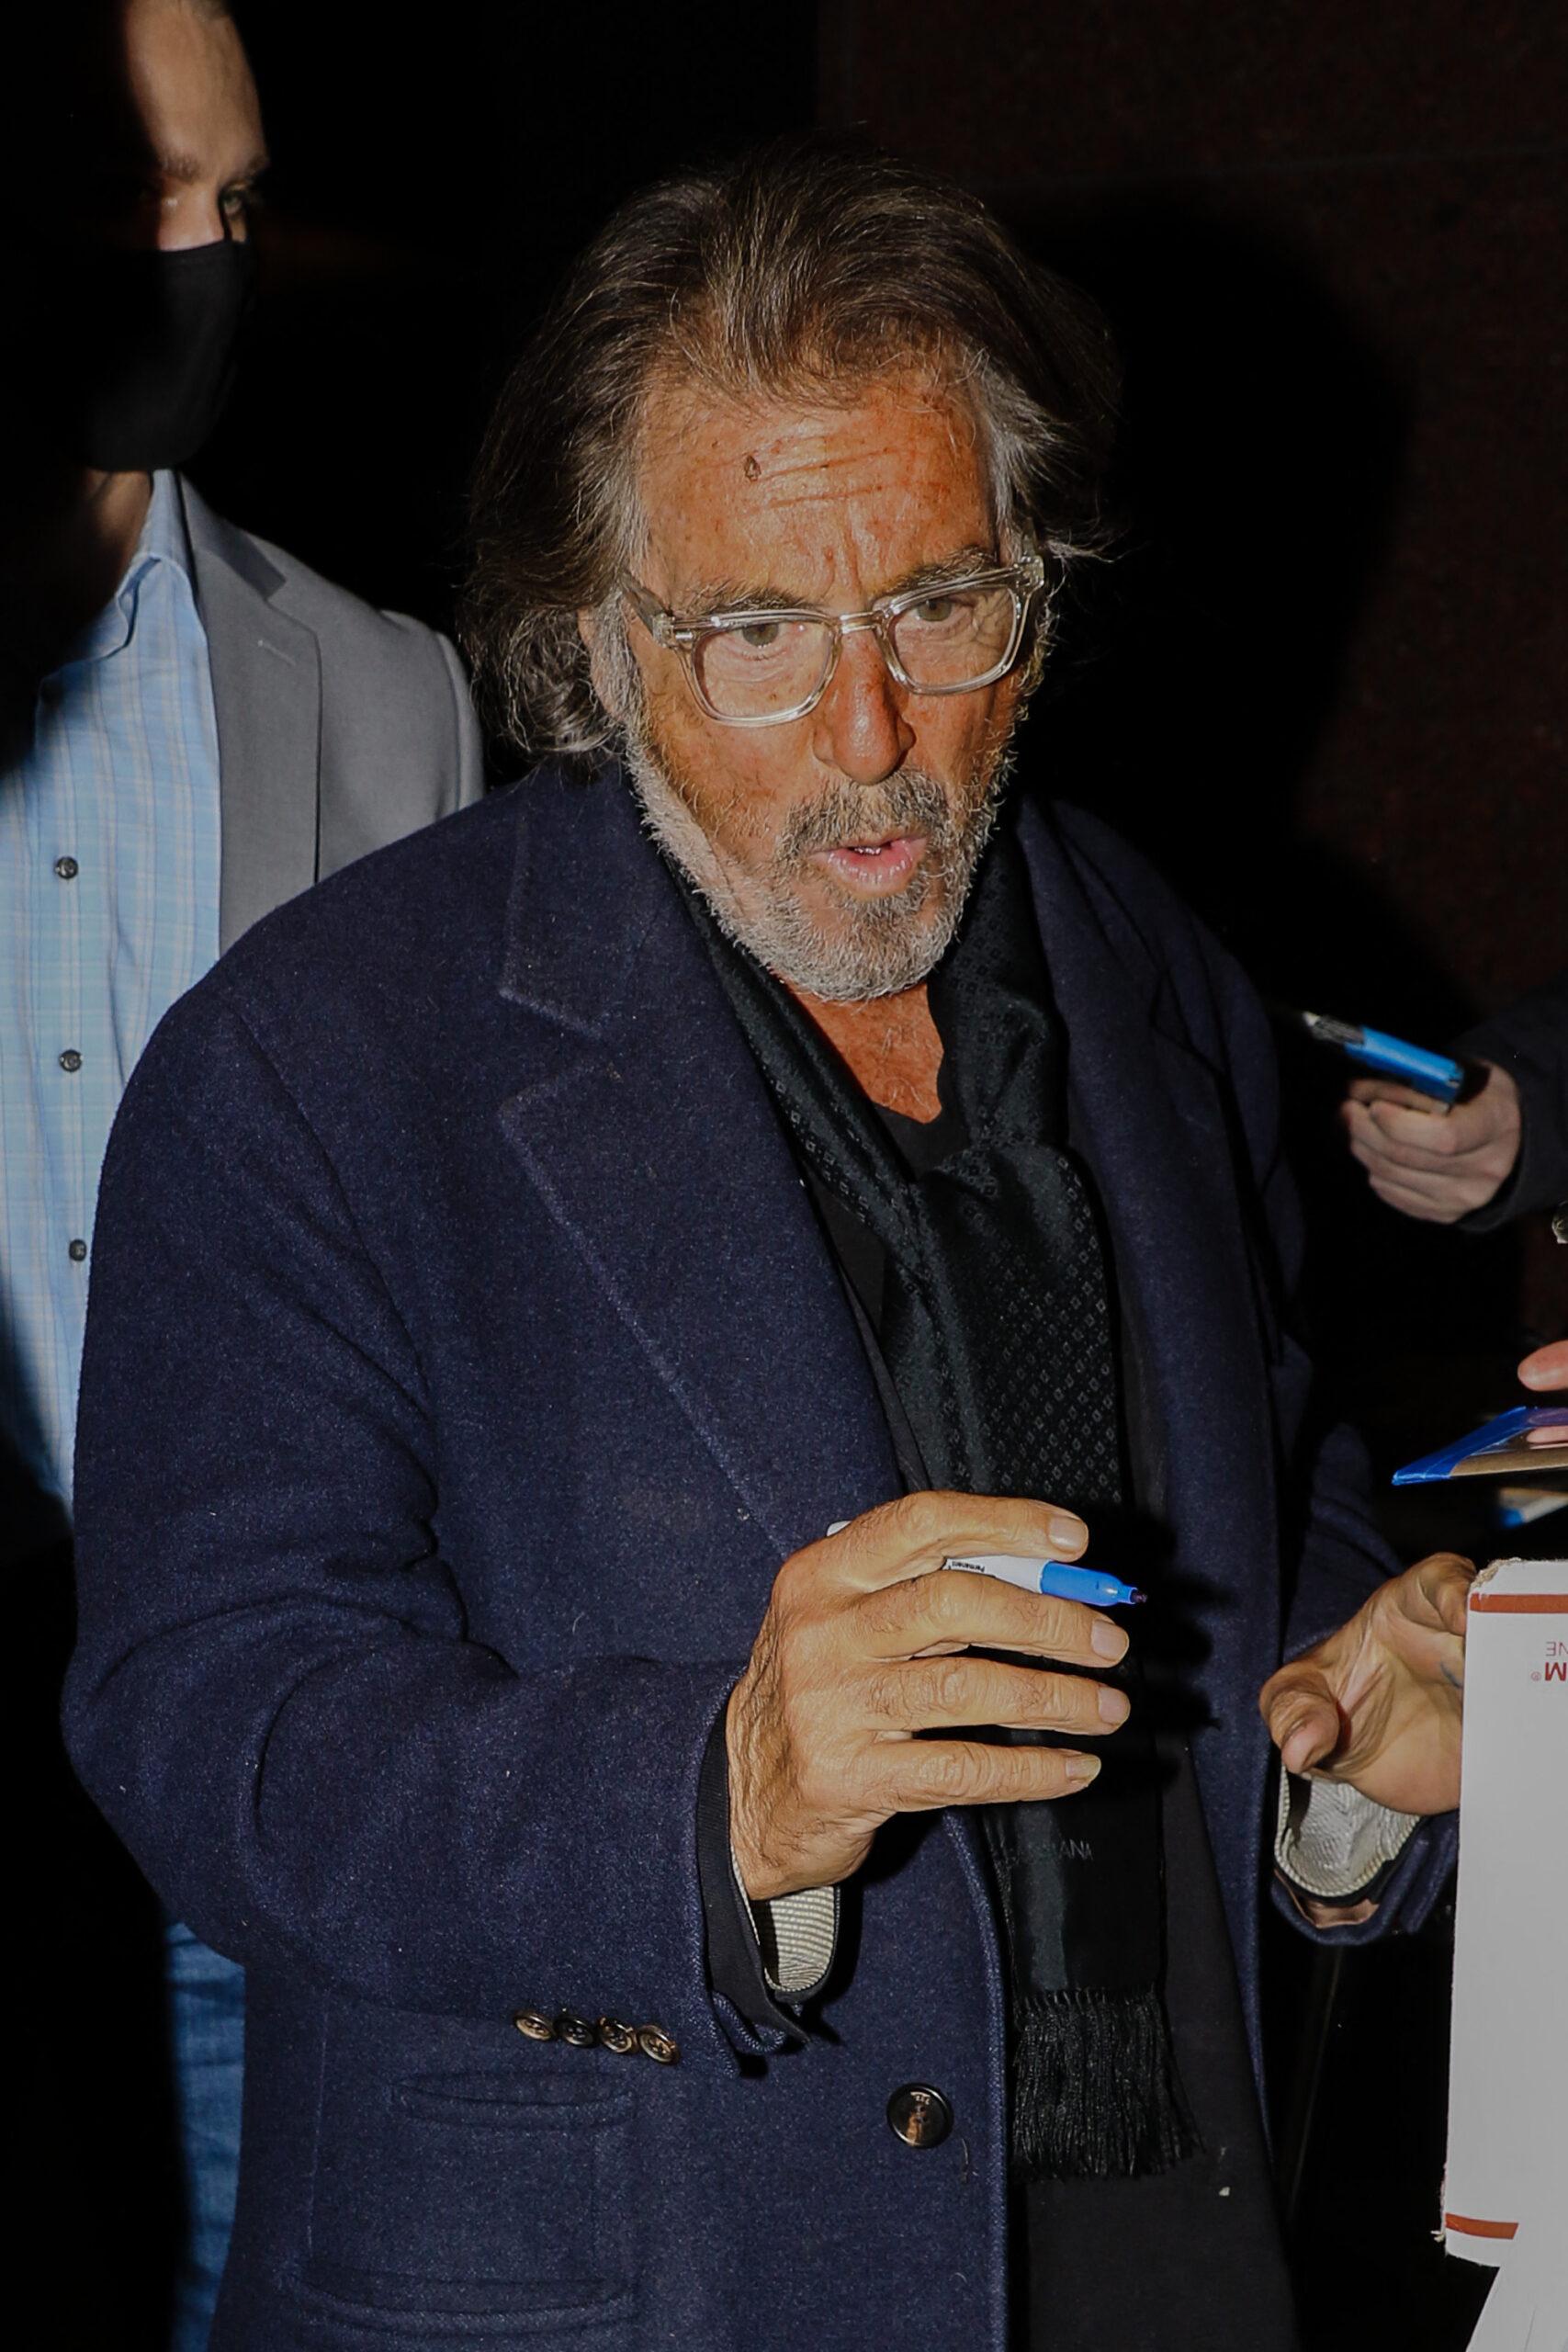 Al Pacino seen signing autographs for fans while out and about in NYC on Nov 15 2021